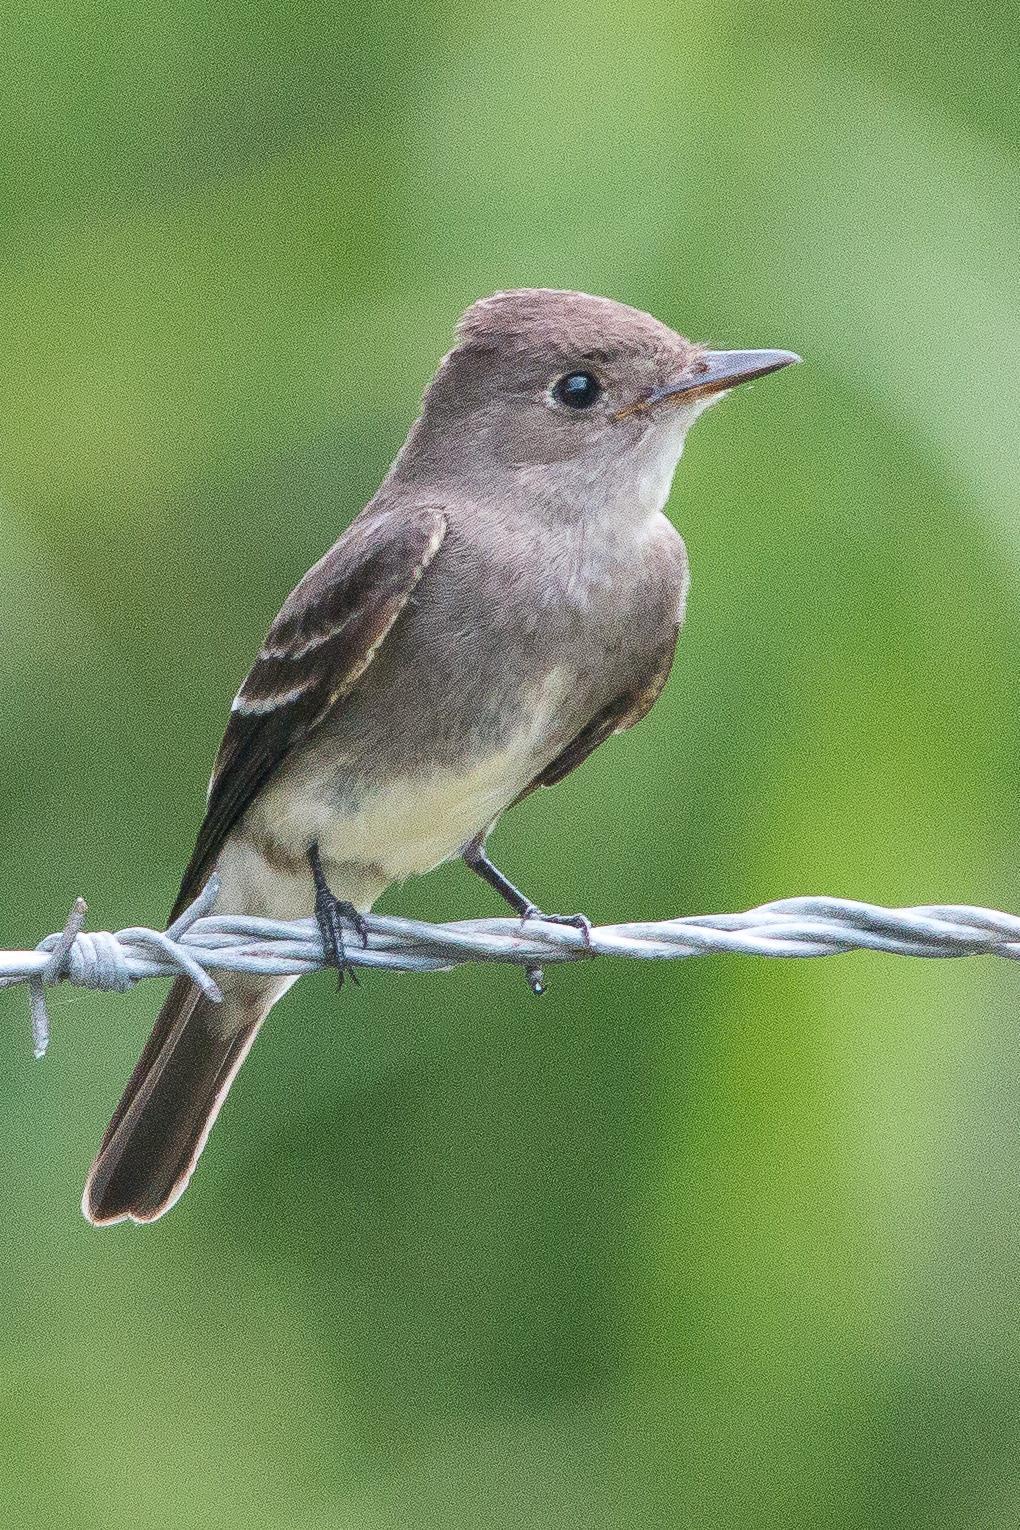 Eastern Wood-Pewee Photo by Marie-France Rivard